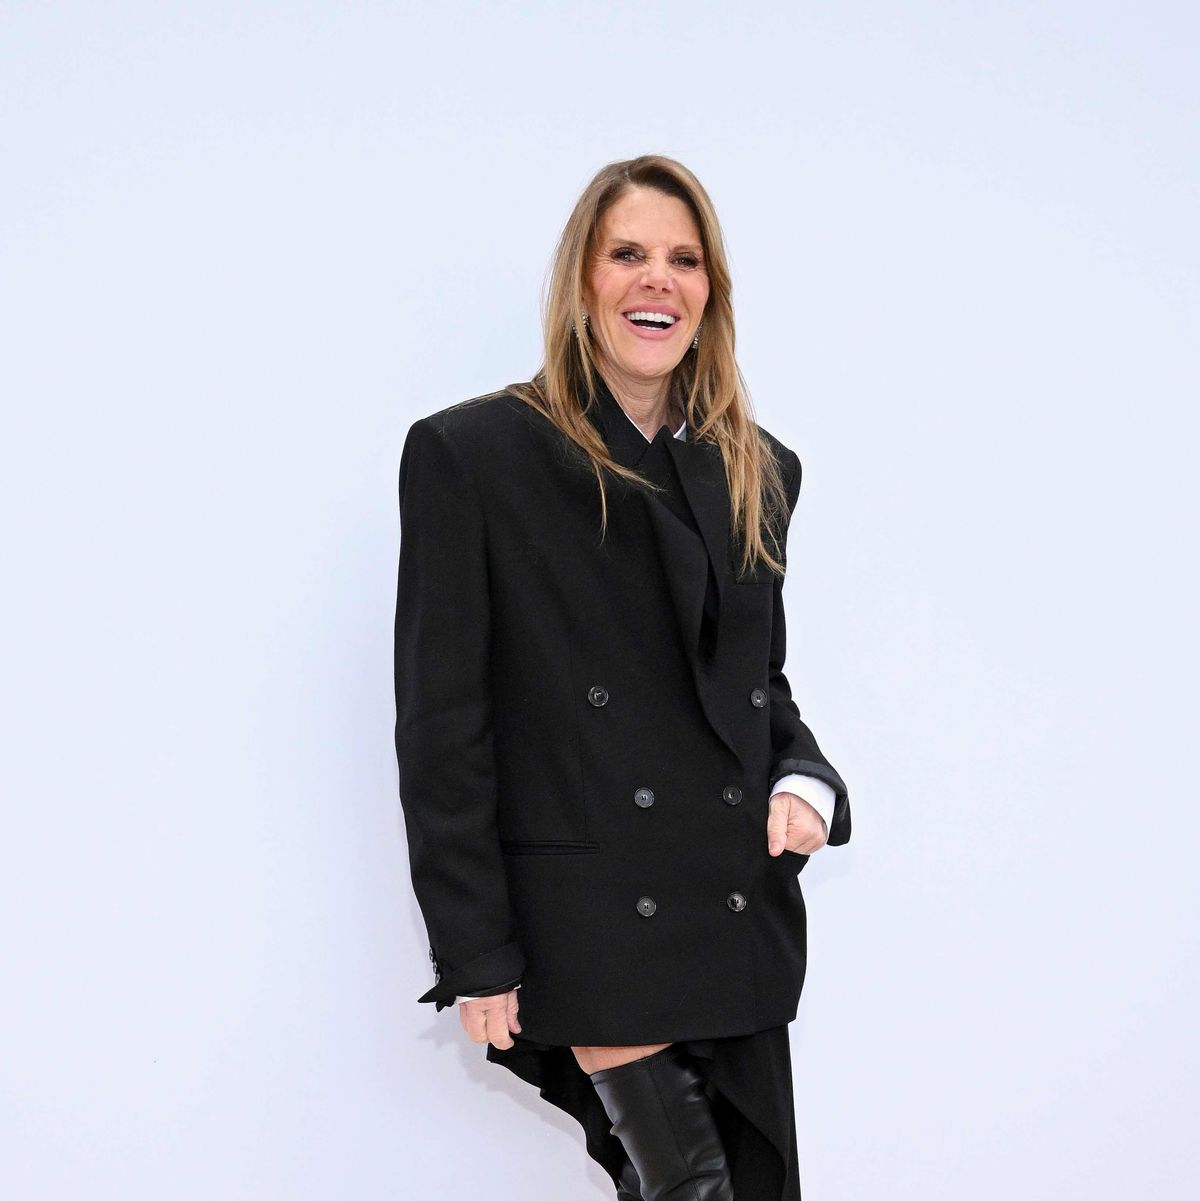 paris, france march 06 editorial use only for non editorial use please seek approval from fashion house anna dello russo attends the stella mccartney womenswear fall winter 2023 2024 show as part of paris fashion week on march 06, 2023 in paris, france photo by stephane cardinale corbiscorbis via getty images